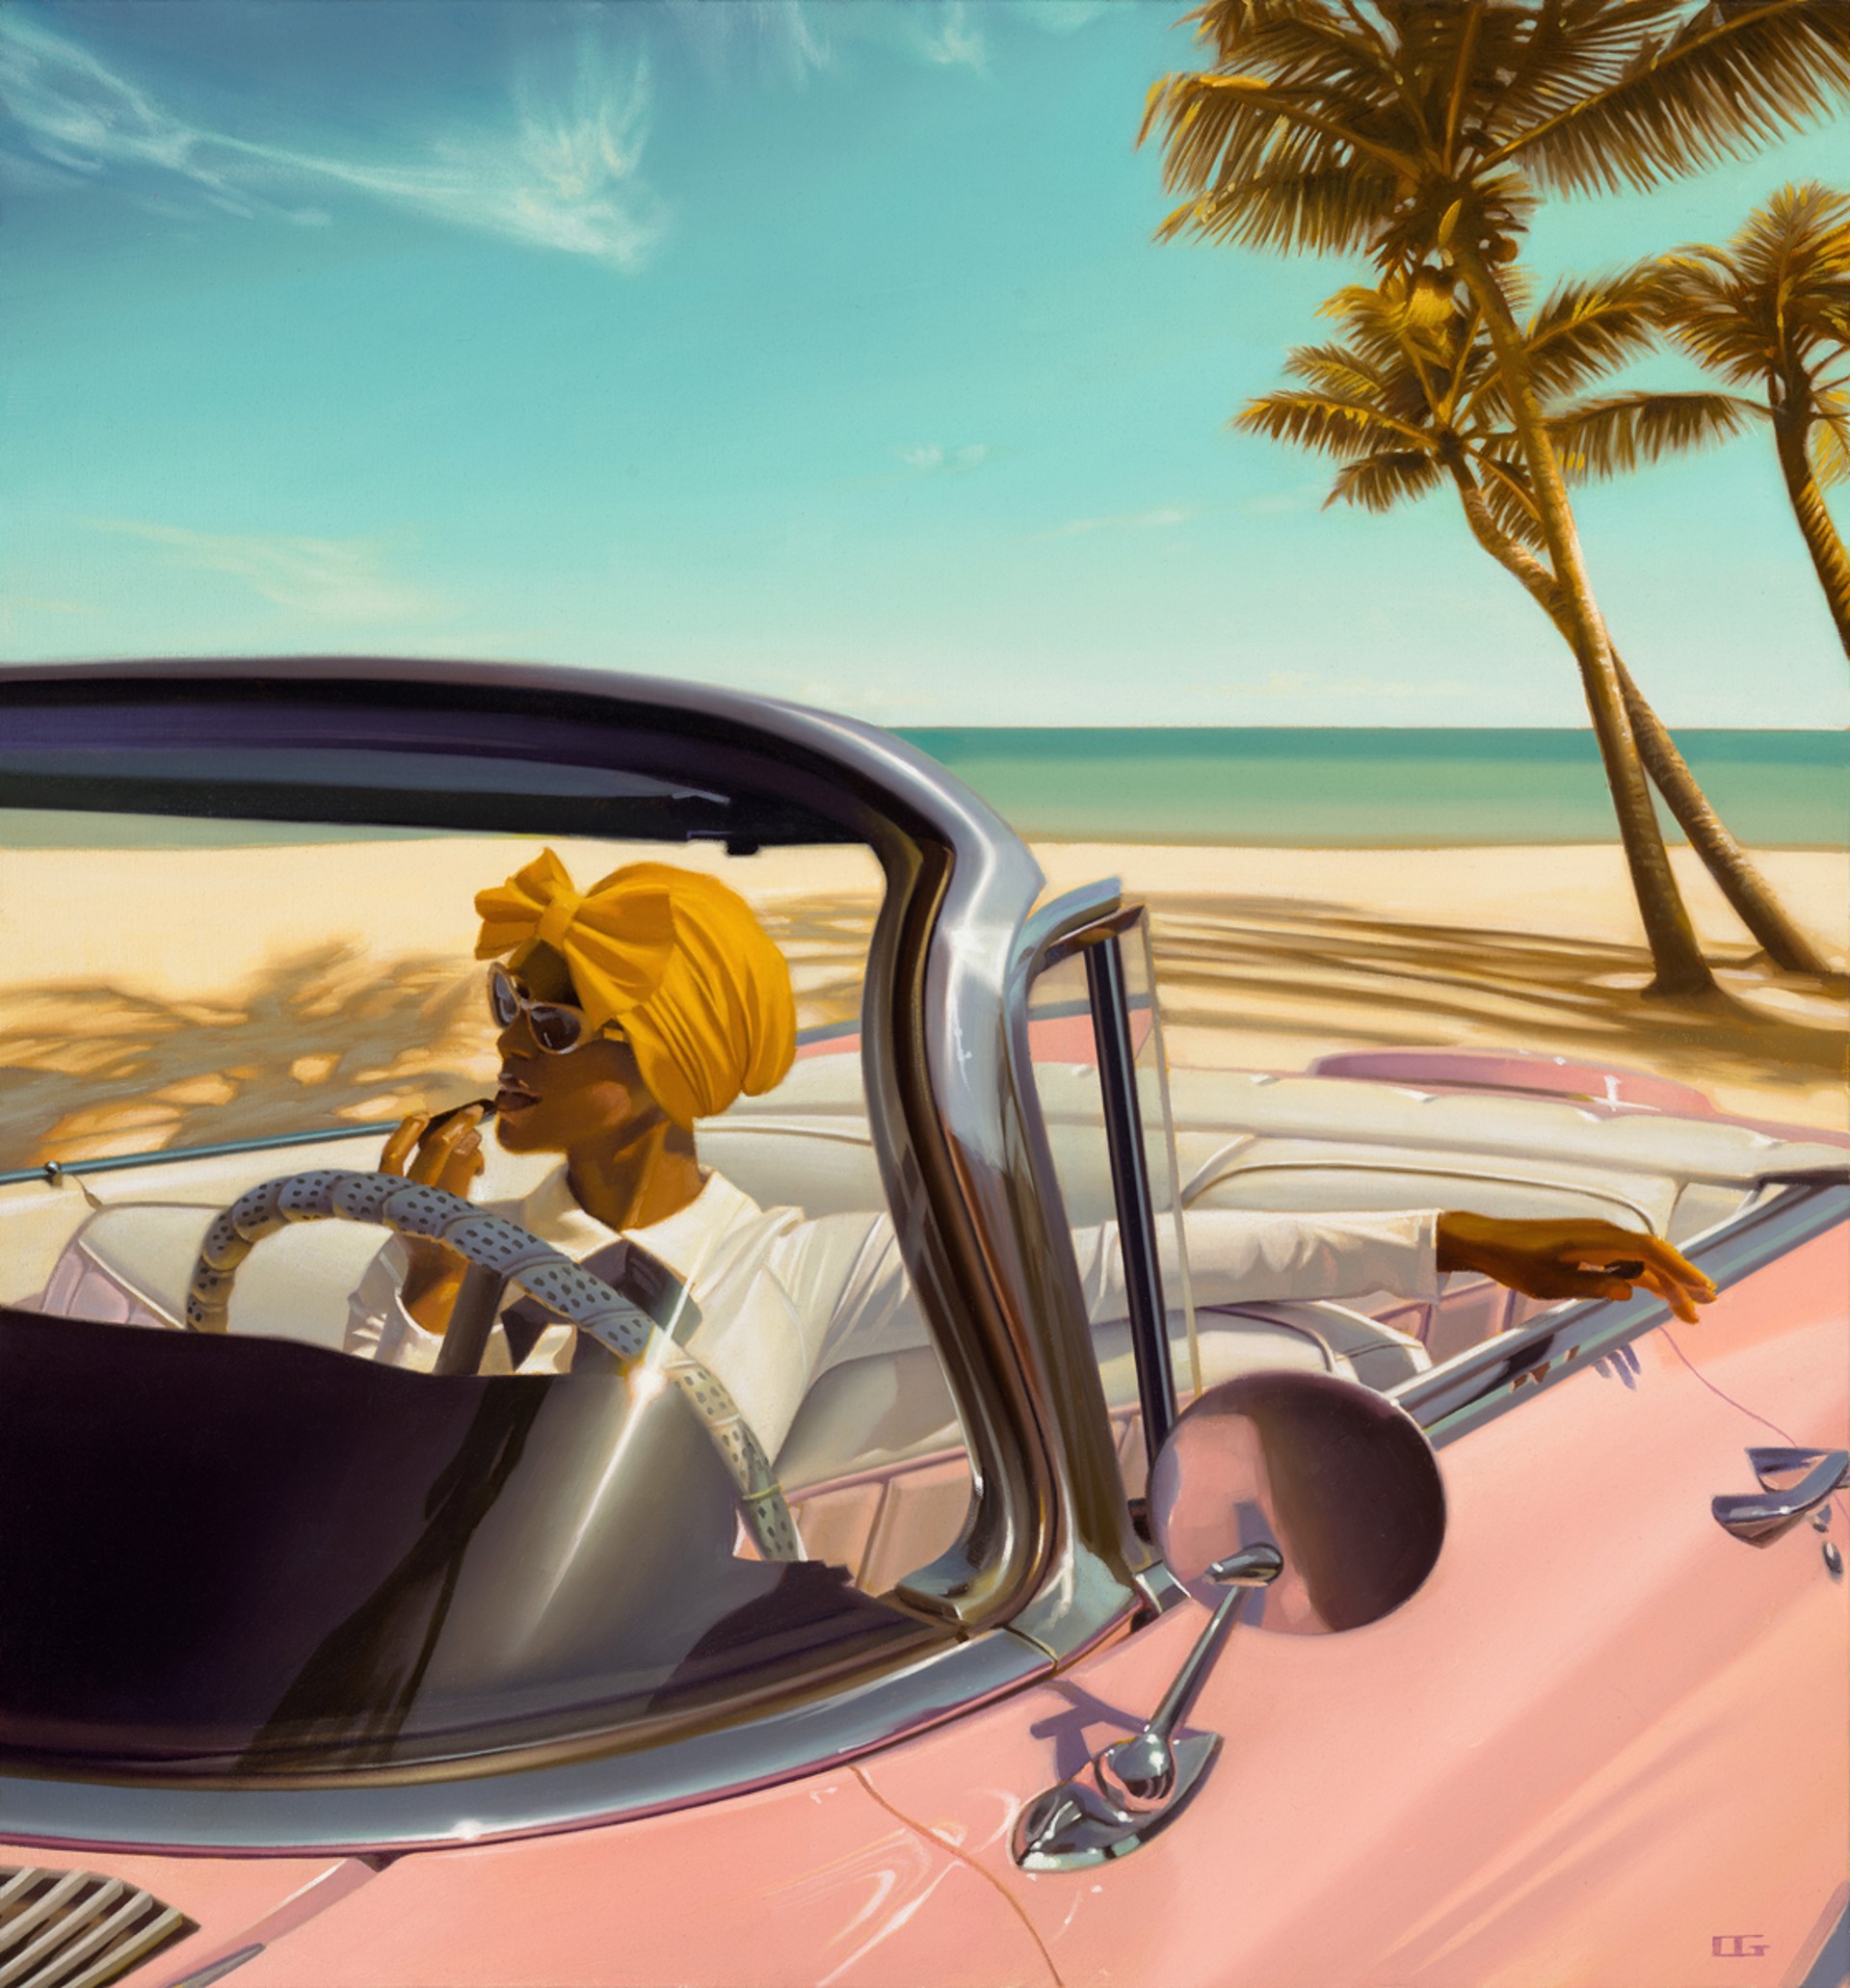 I'm In The Pink Caddy, Can't Miss it! - Original by Carrie Graber